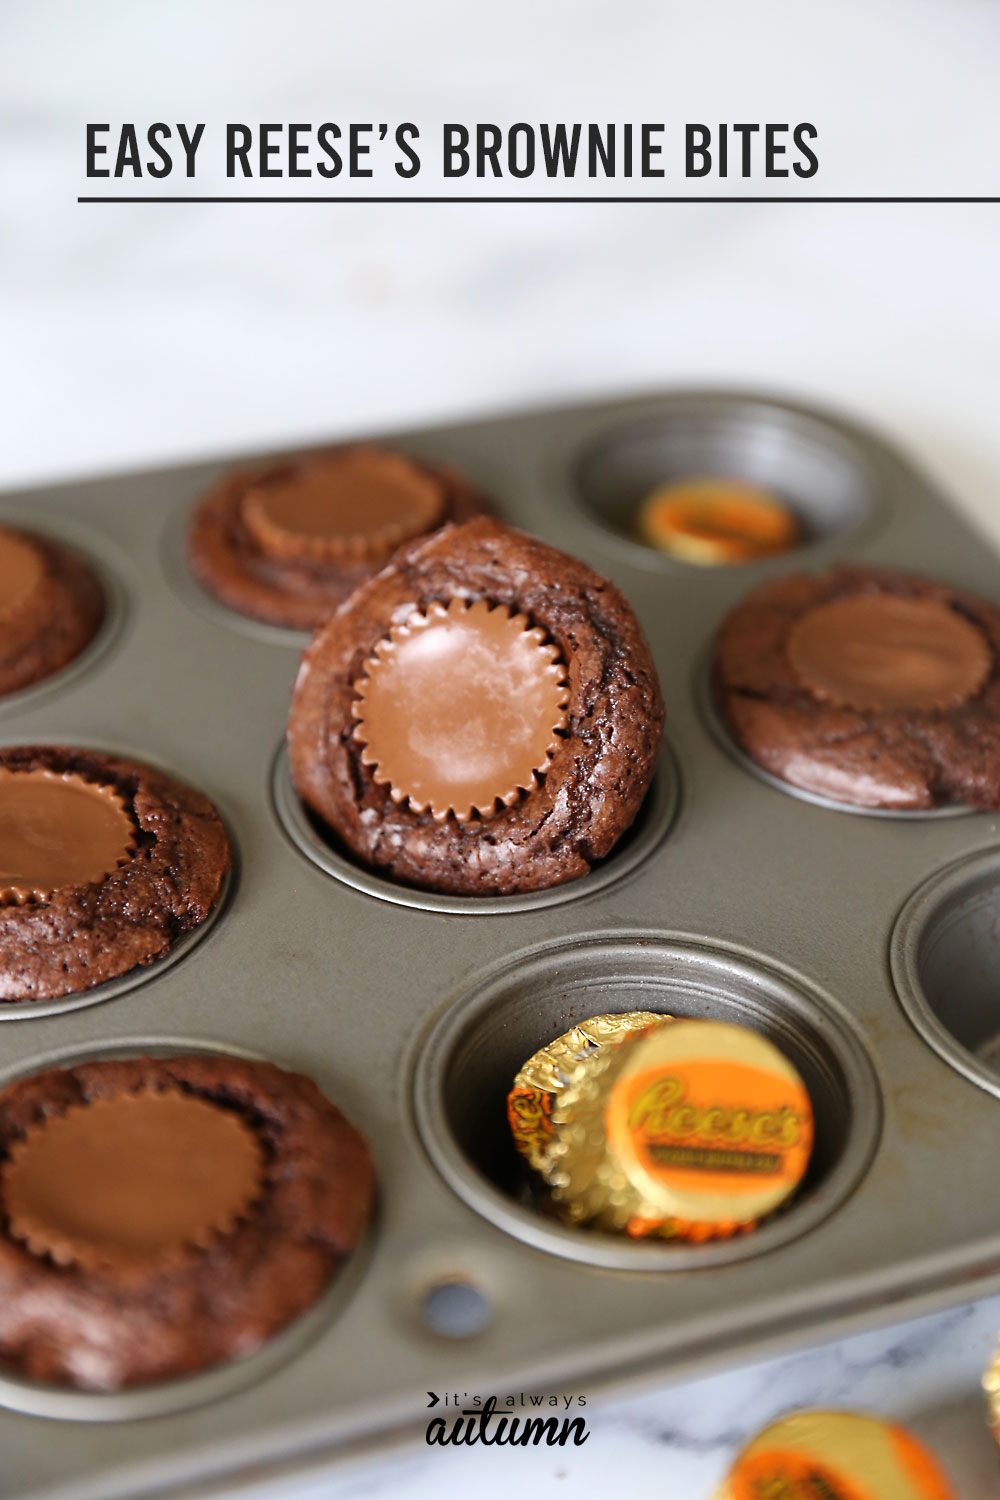 Easy peanut butter cup brownie bites